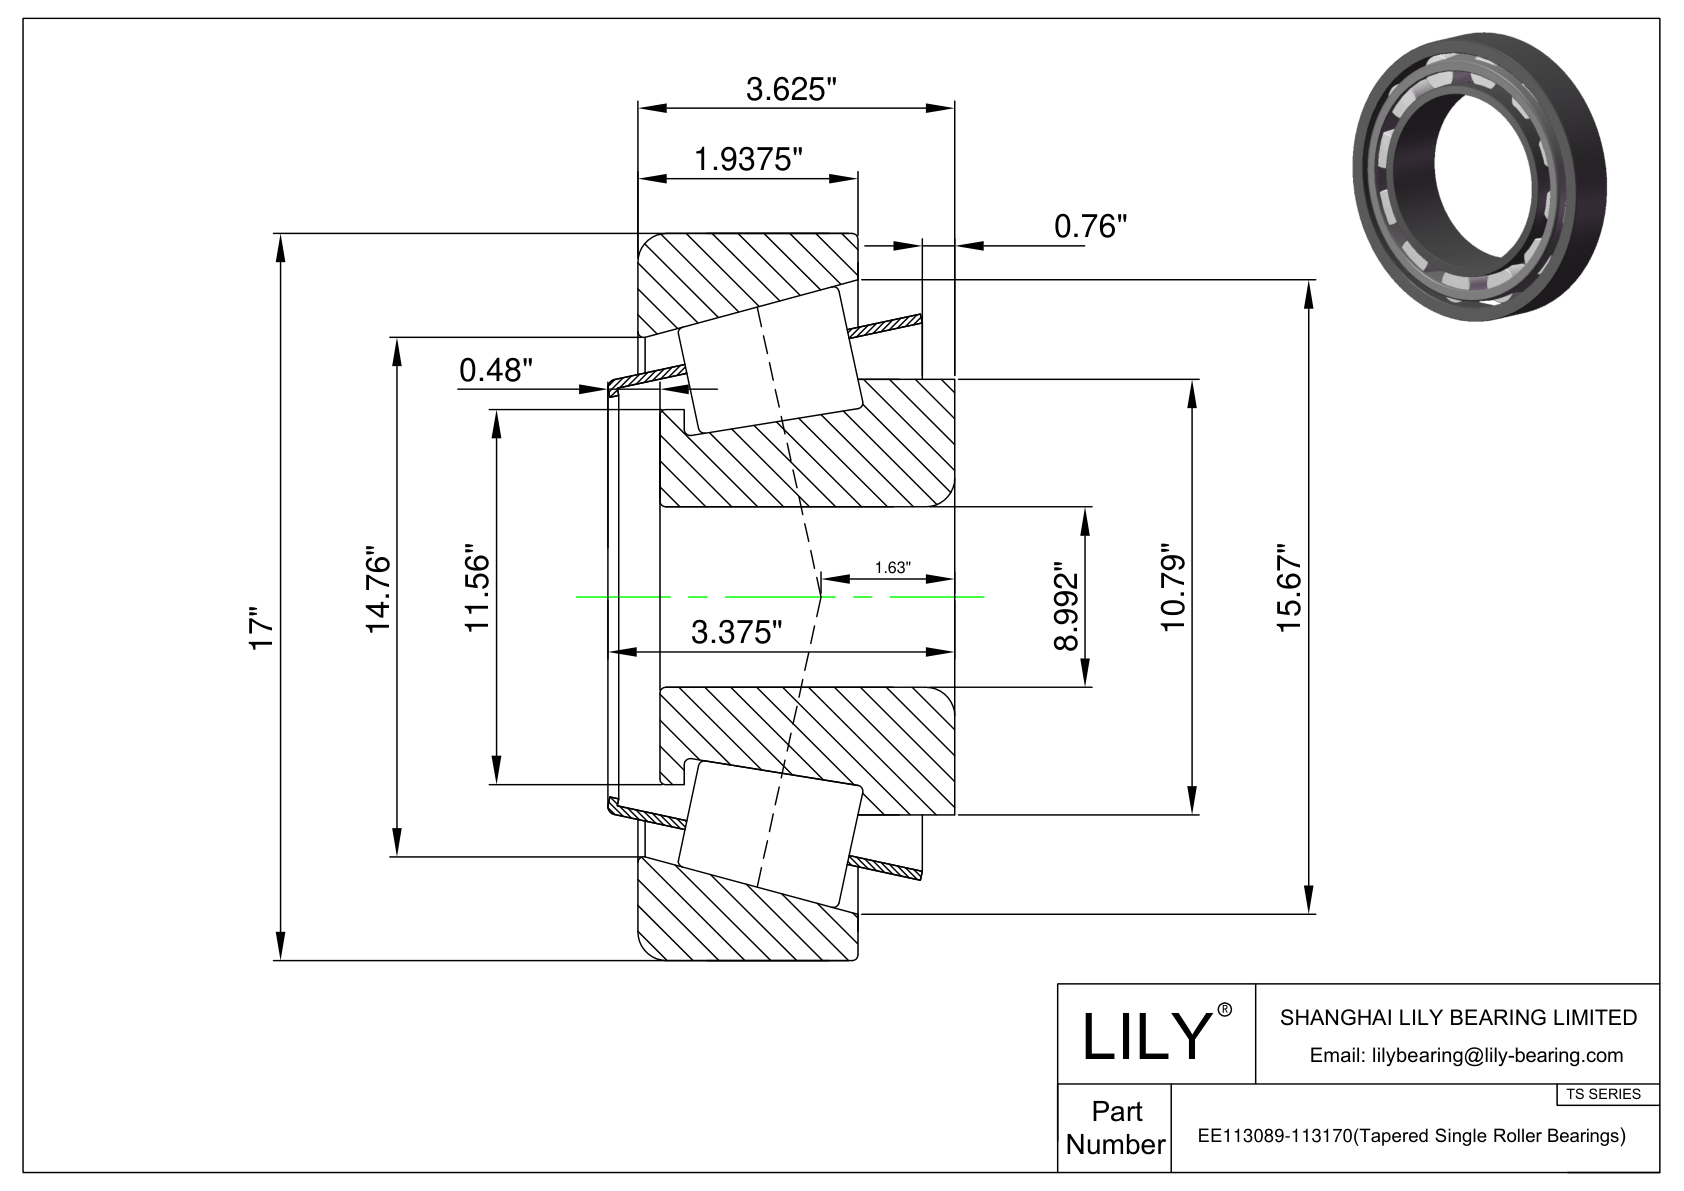 EE113089-113170 TS (Tapered Single Roller Bearings) (Imperial) cad drawing